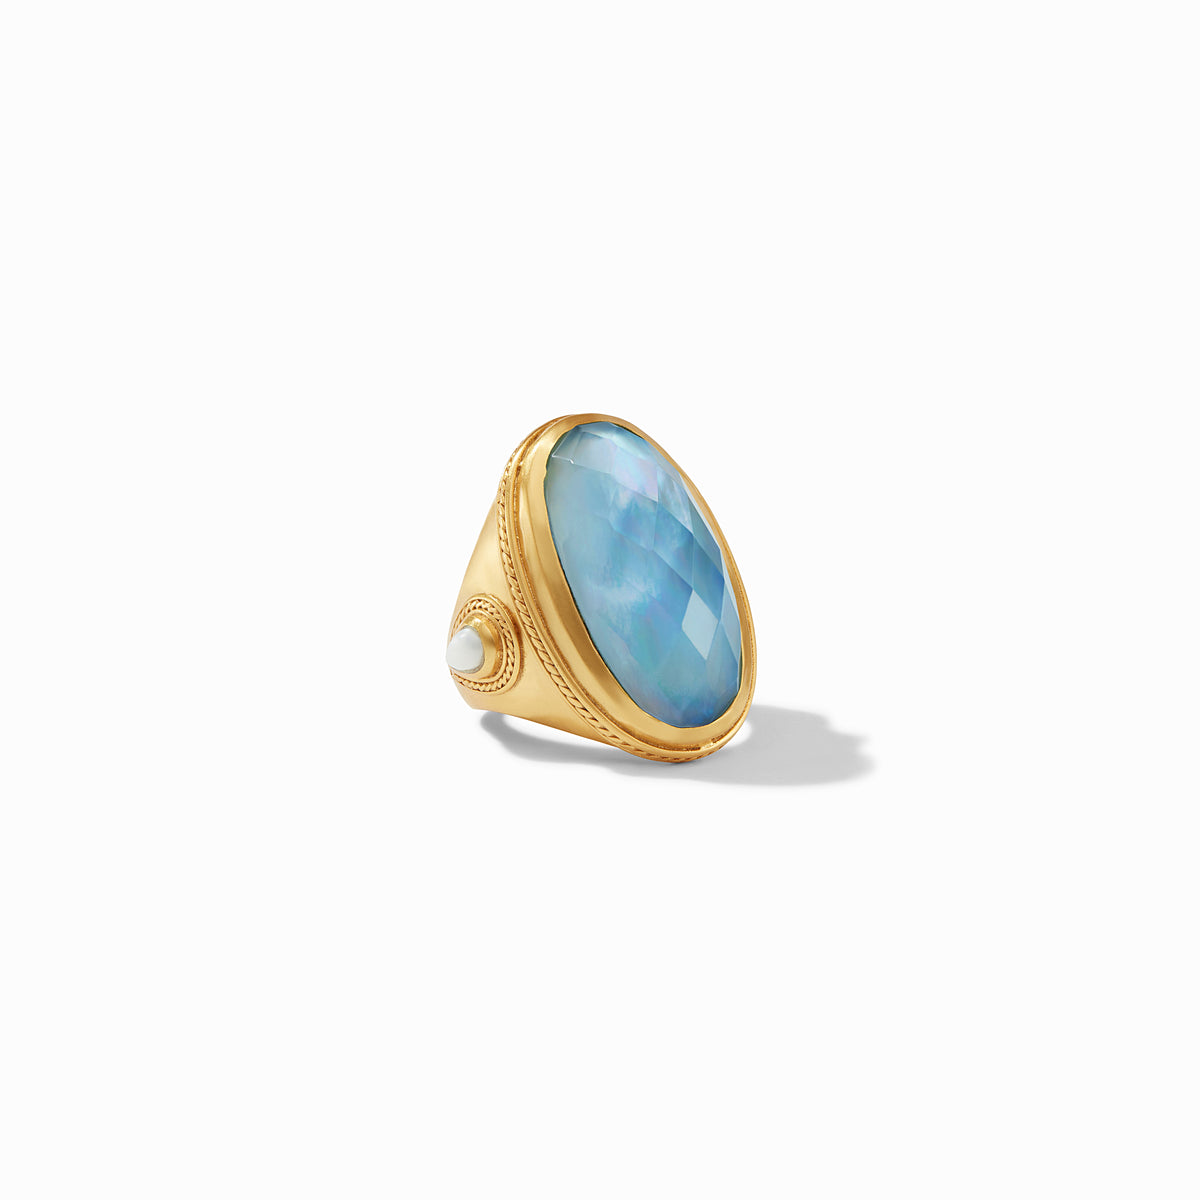 Julie Vos - Cassis Statement Ring, Iridescent Chalcedony Blue / 8, Iridescent Chalcedony Blue, signature stack, into the blues, new in chalcedony blue, classics in chalcedony blue, summer in color, long weekend, long weekend jewels, gifts, valentines day gift guide, joy of gifting, cassis collection, new chalcedony blue, honeybee spotlight, last chance